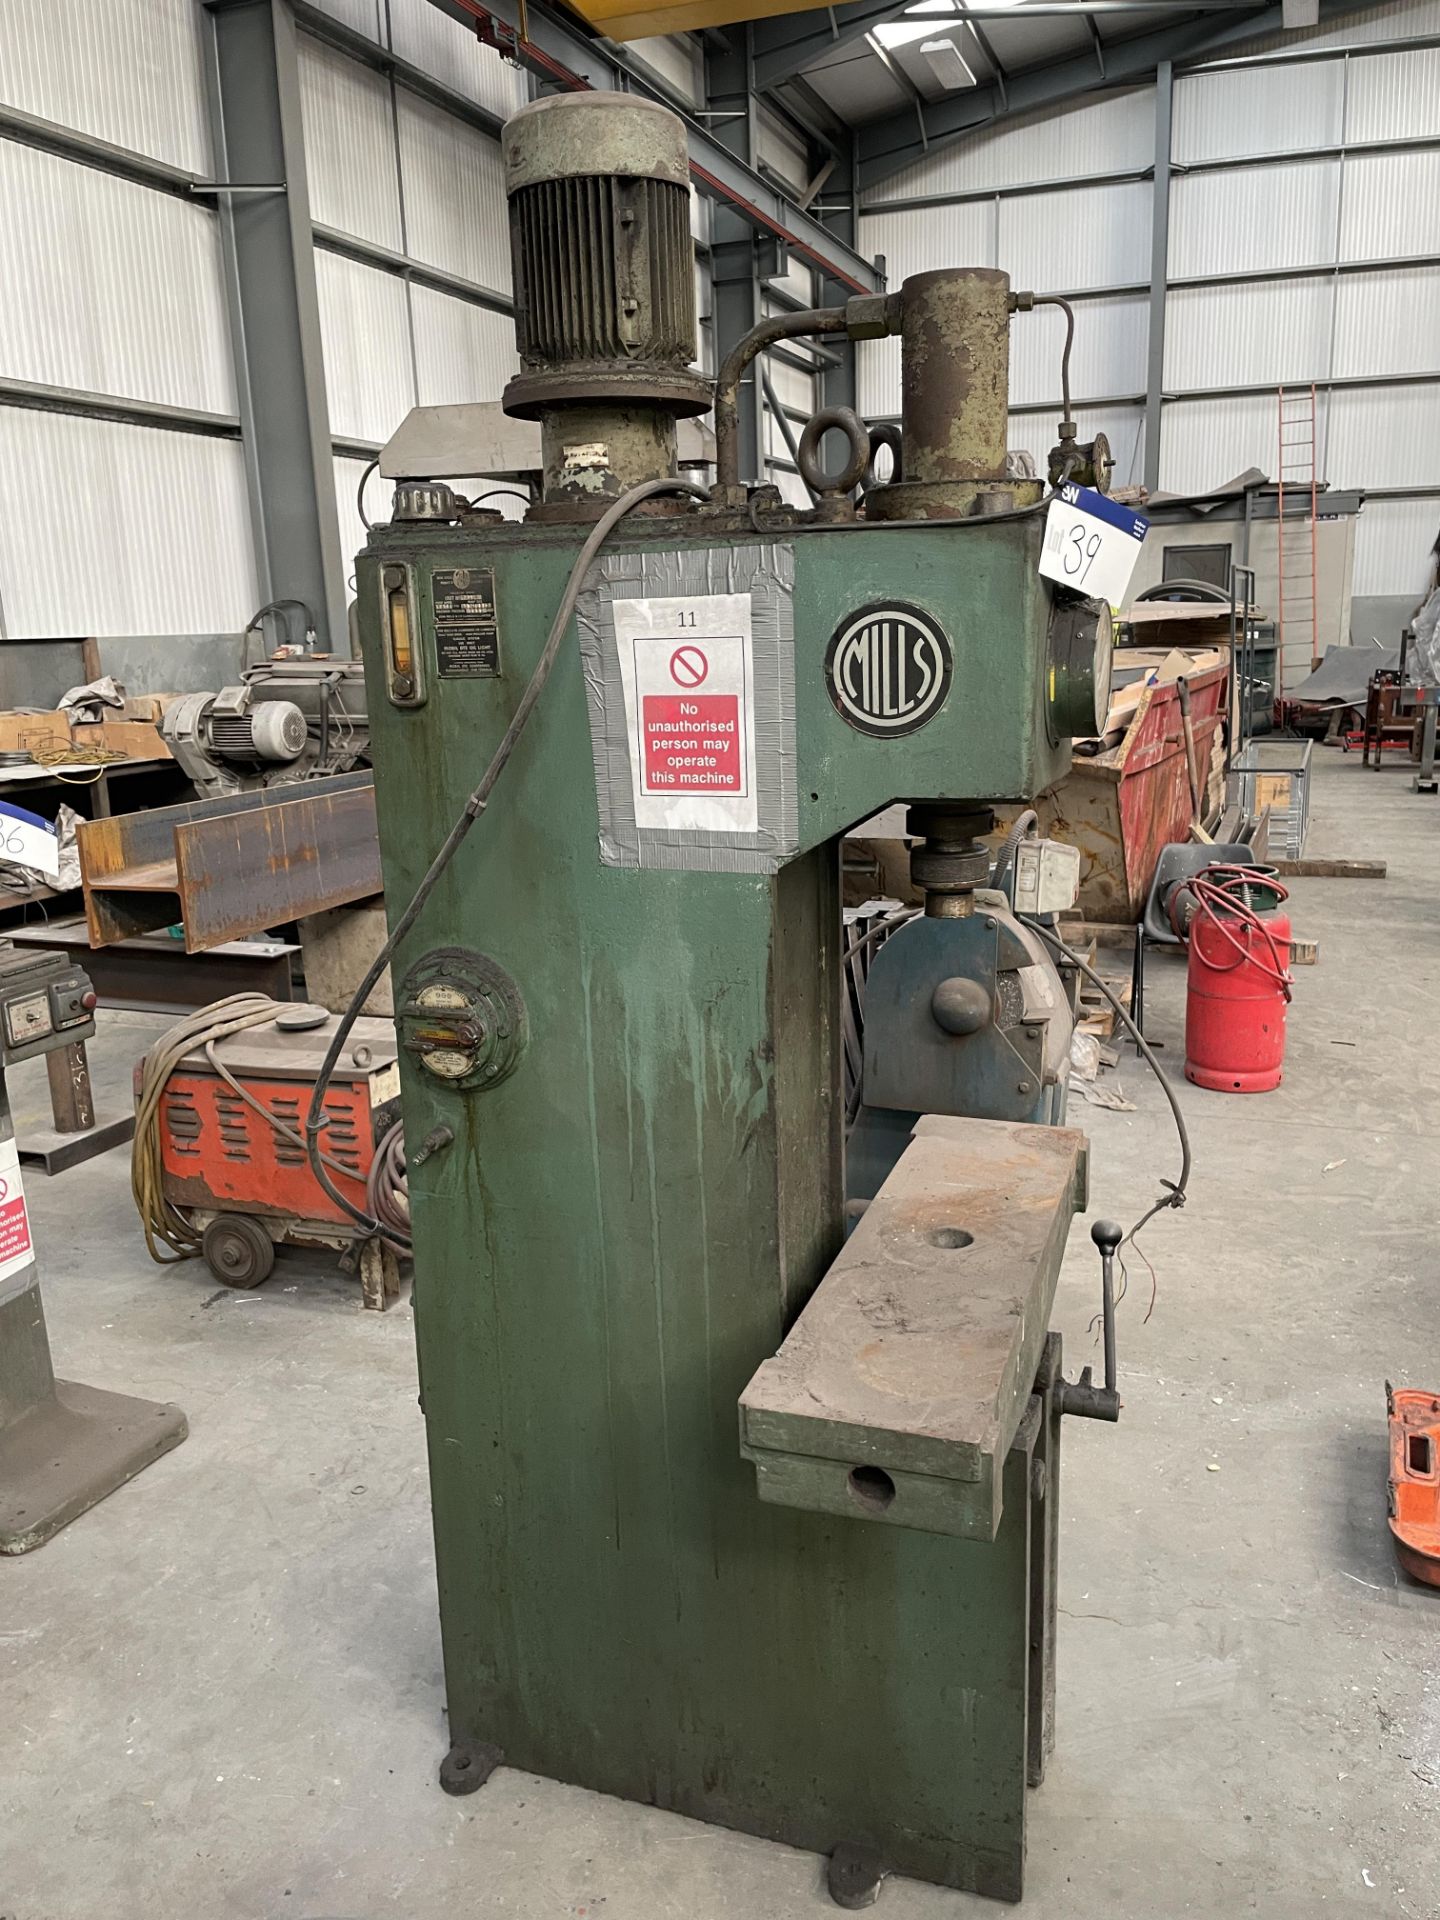 Mills Hydraulic Press, serial no. 52071, with table approx. 910mm x 250mm, lot located at Ocean - Image 2 of 4